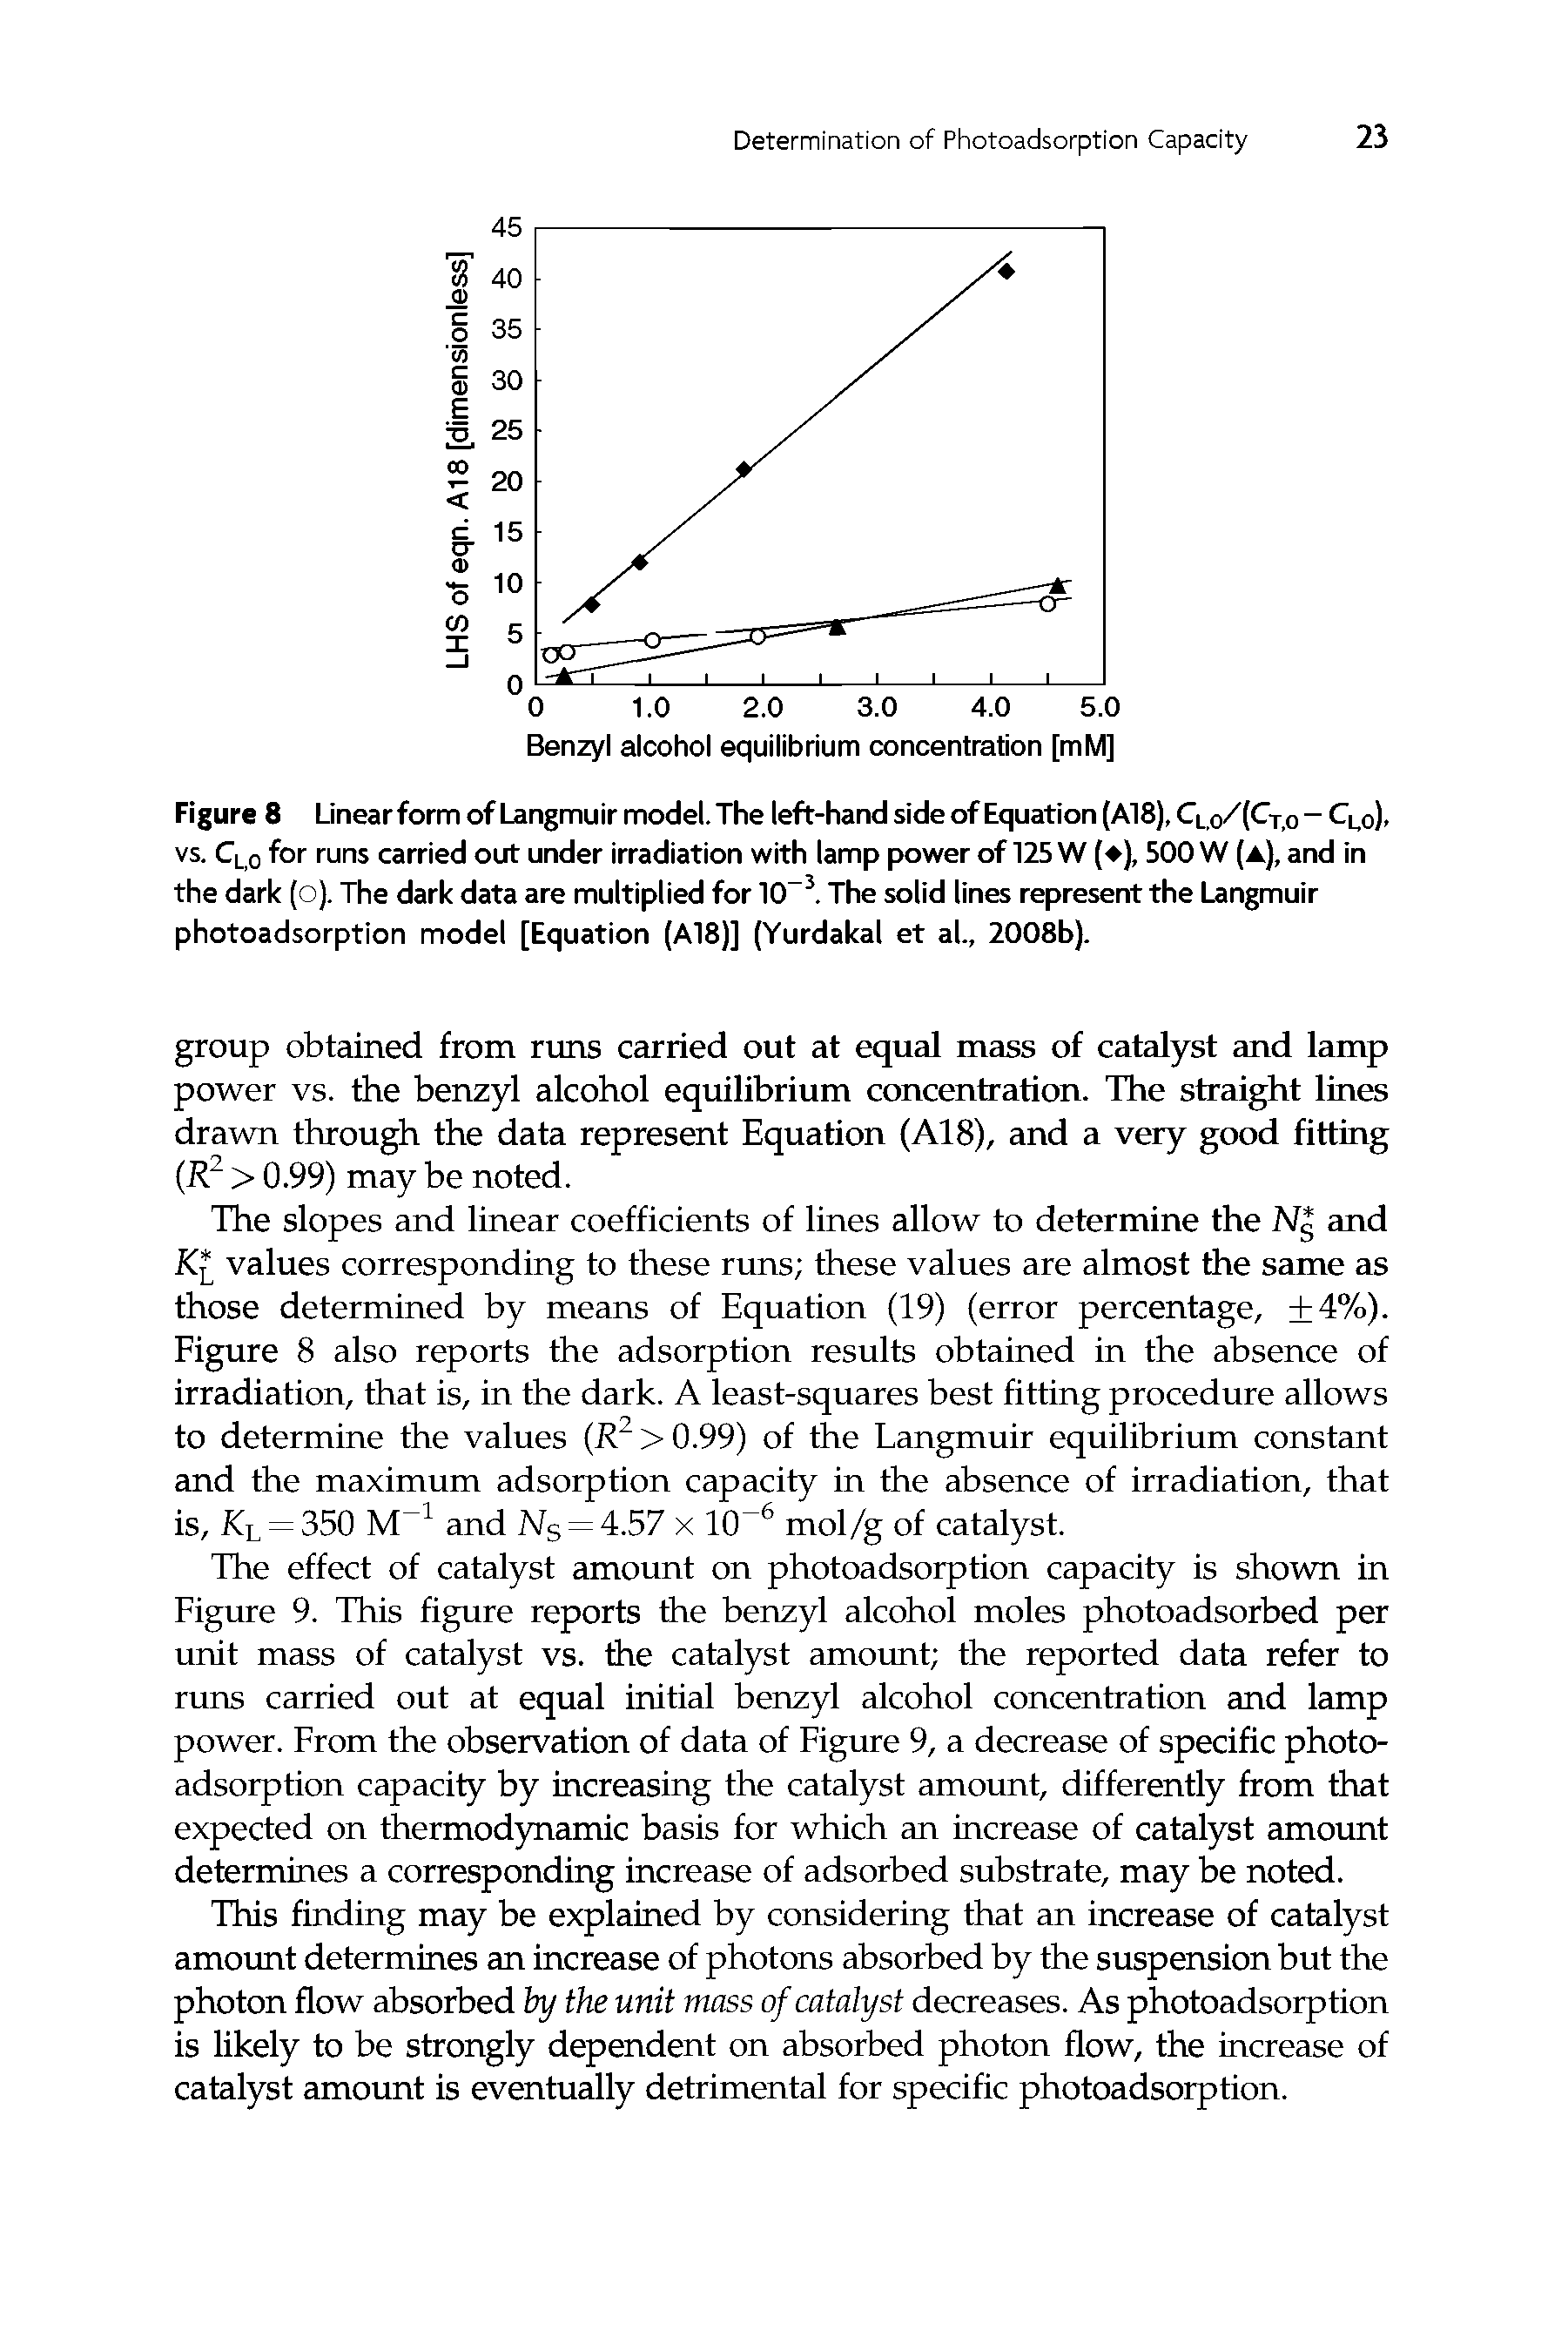 Figure 8 Linearform of Langmuir model. The left-hand side of Equation (A18), Cl,o/(Ct,o - C o), vs. Cl 0 for runs carried out under irradiation with lamp power of 125 W ( ), 500 W (a), and in the dark (o). The dark data are multiplied for 0 The solid lines represent the Langmuir photoadsorption model [Equation (A18)] (Yurdakal et al., 2008b).